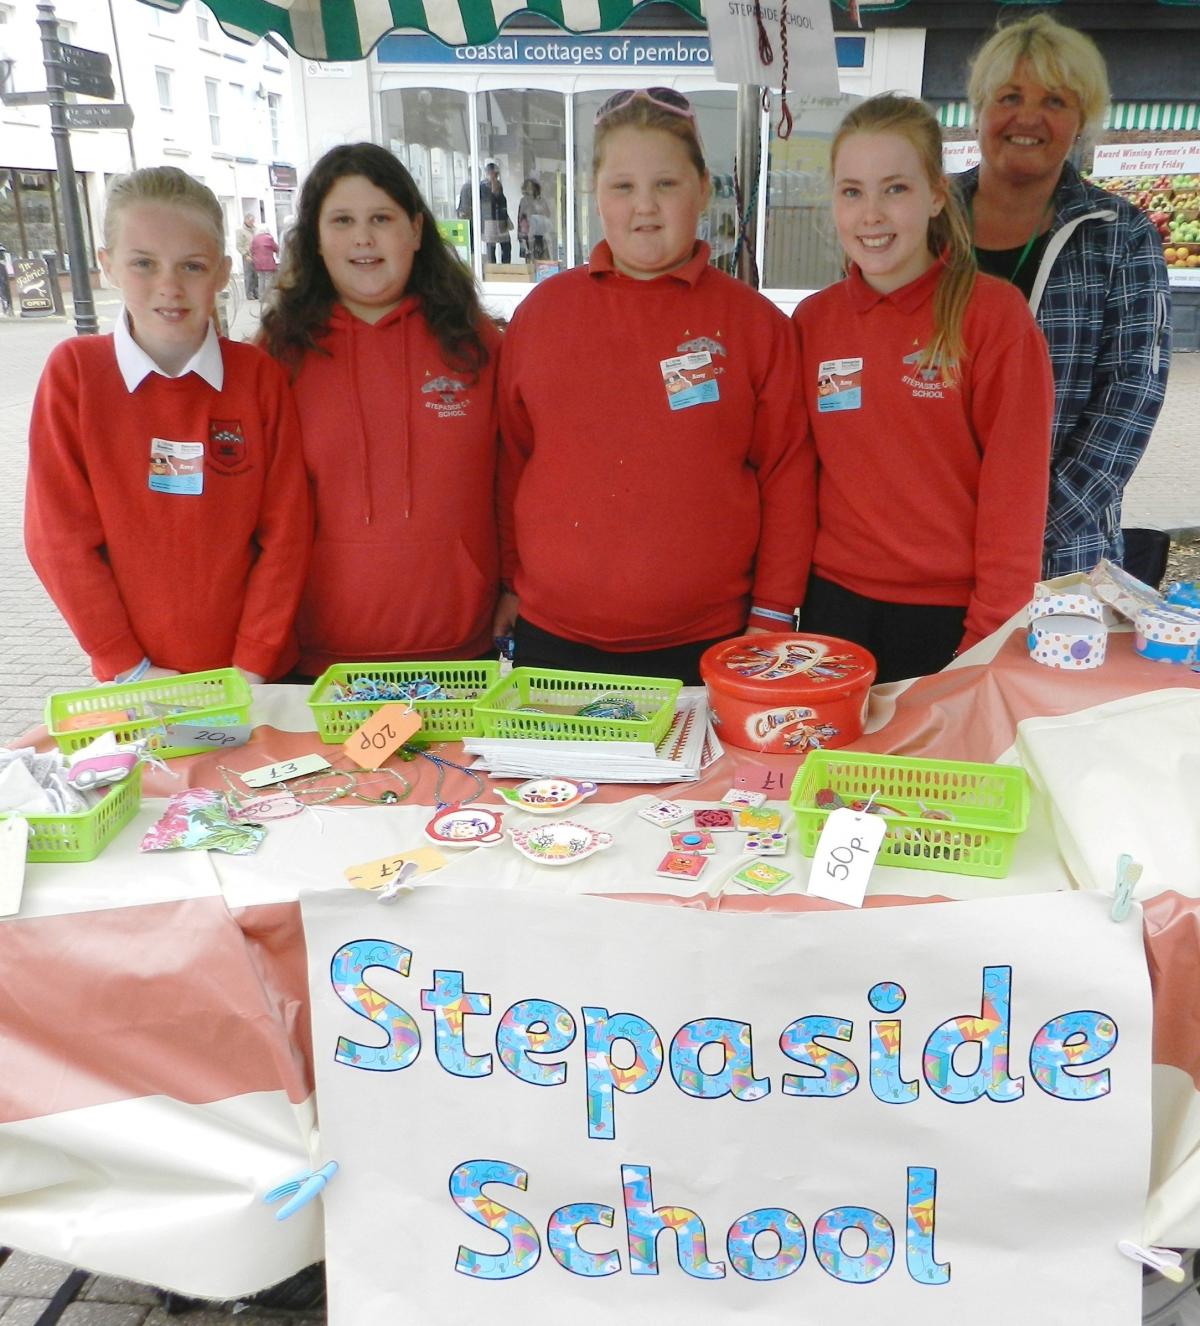 Year 6 pupils from Stepaside School were selling items including decorated boxes, friendship bracelets and painted tiles and tea bag stands on their stall.
